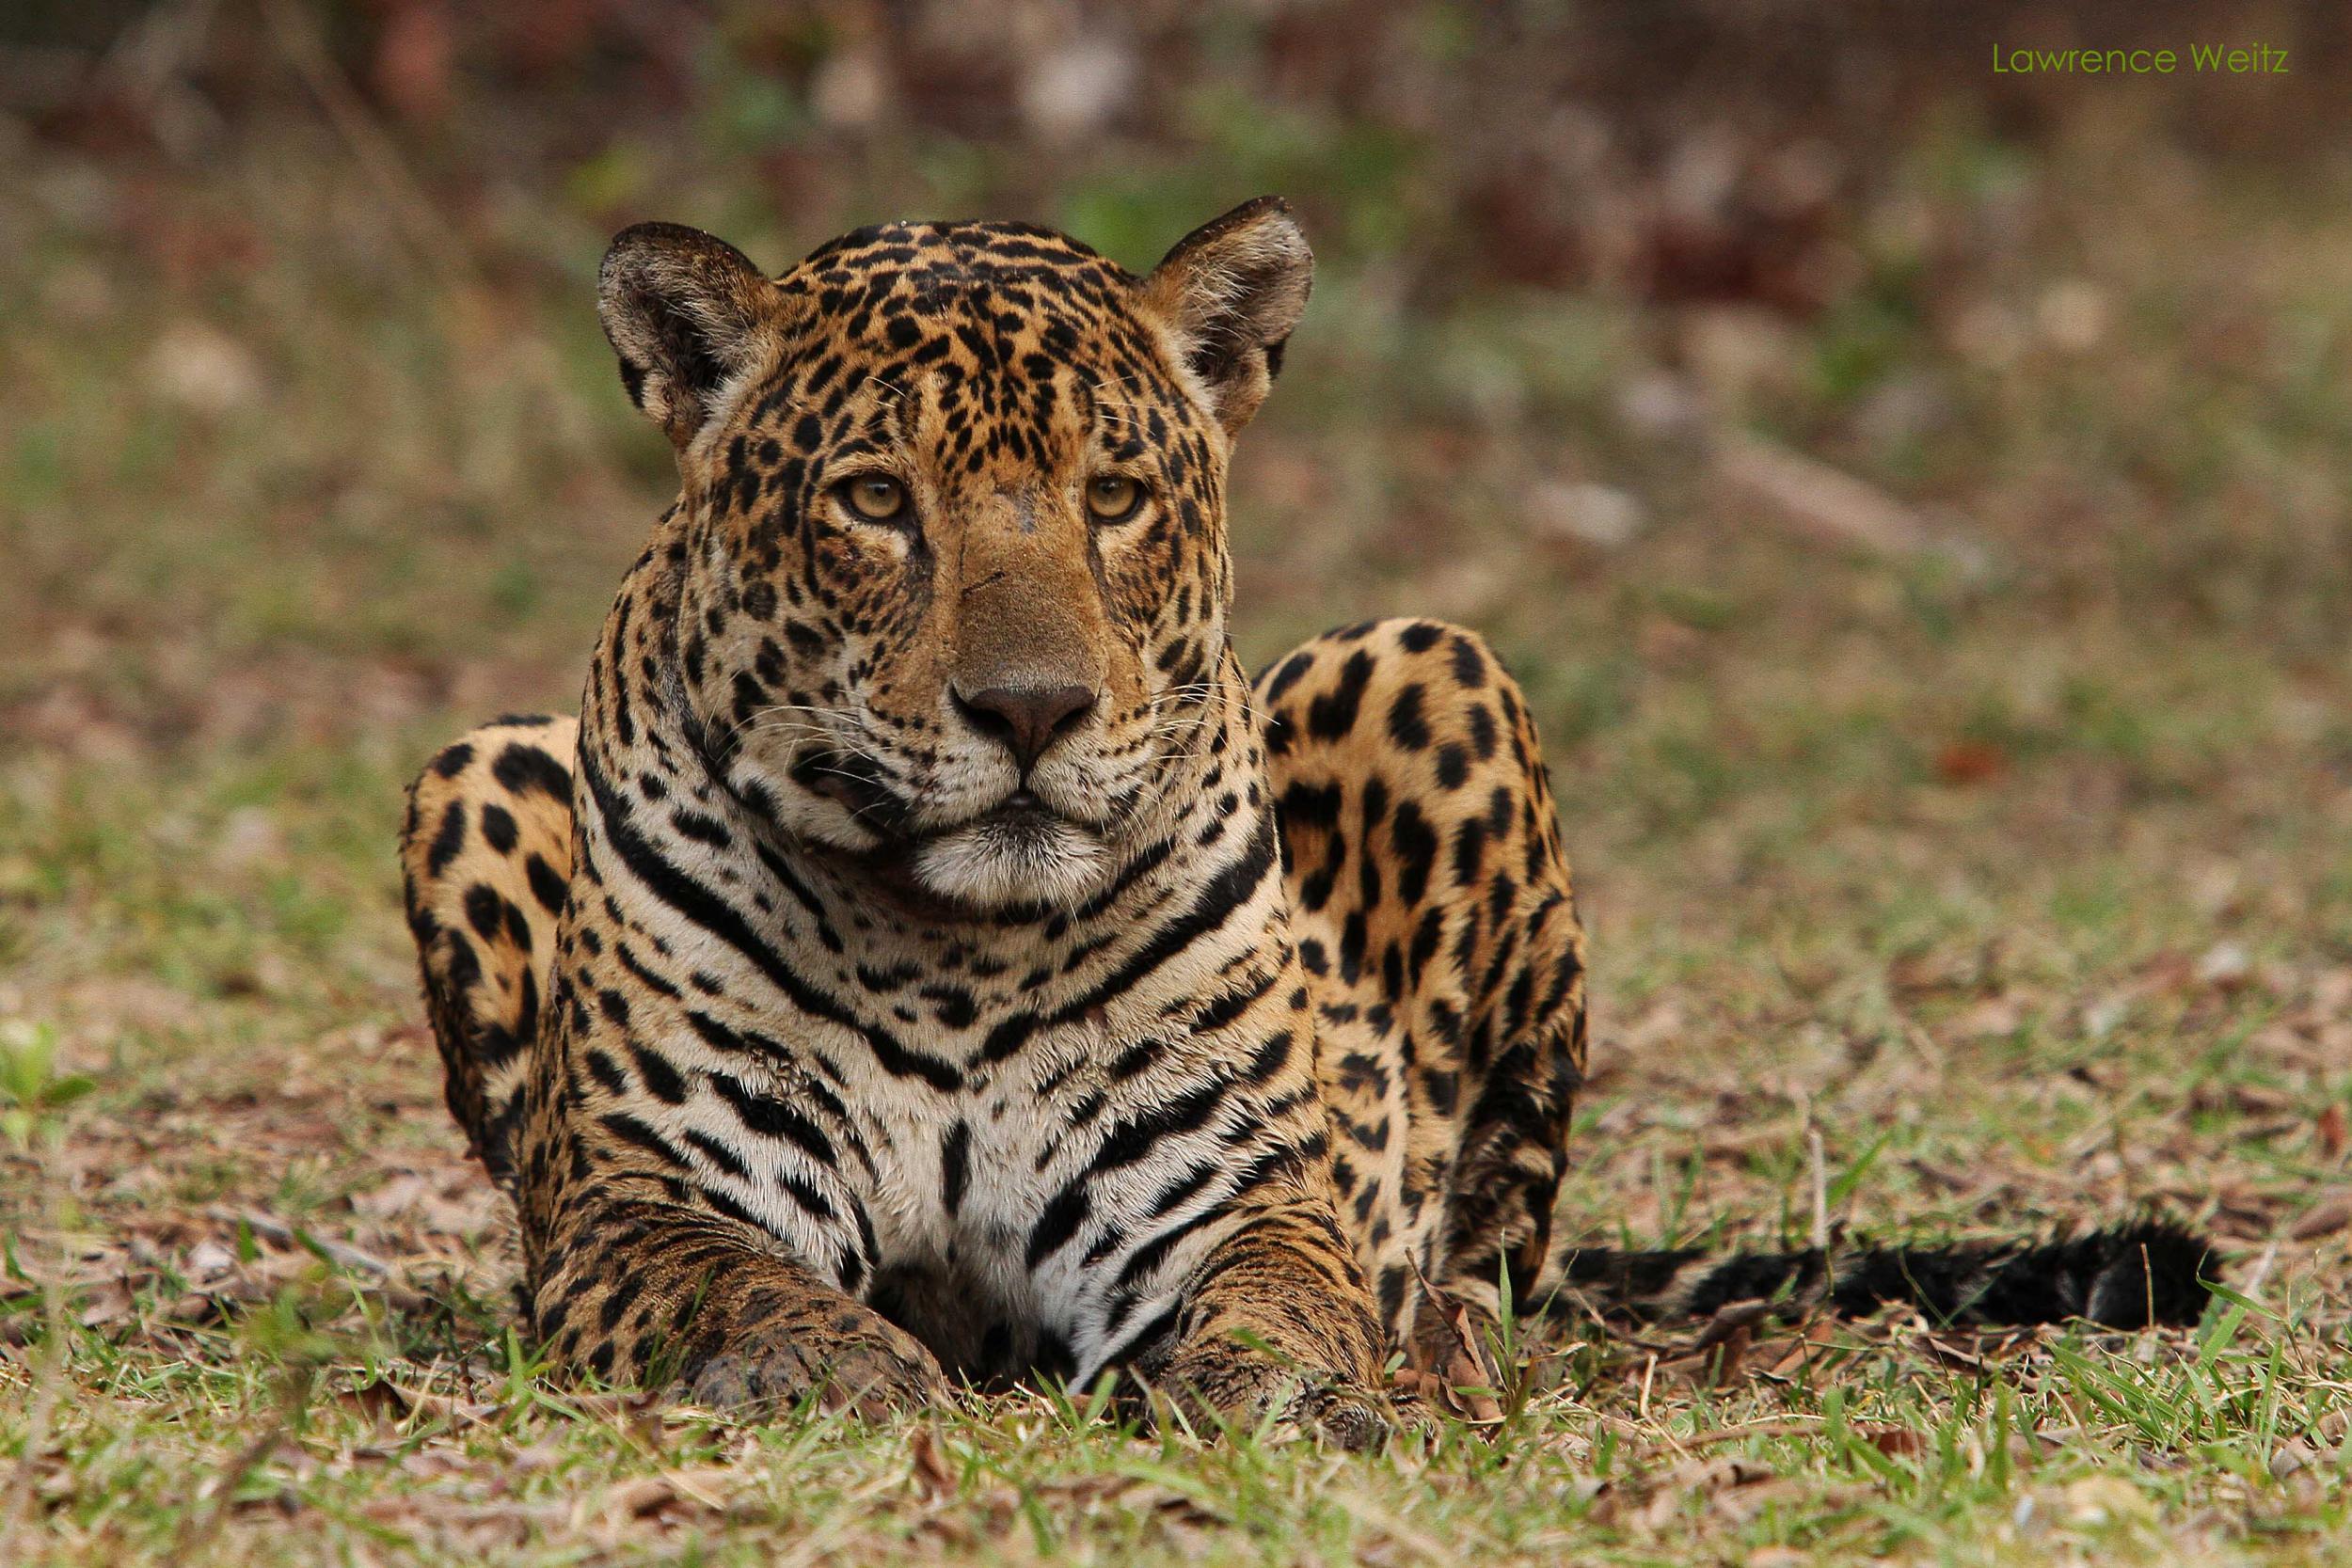 There’s an almost 100 per cent success rate to spotting jaguars in Brazil’s Pantanal region